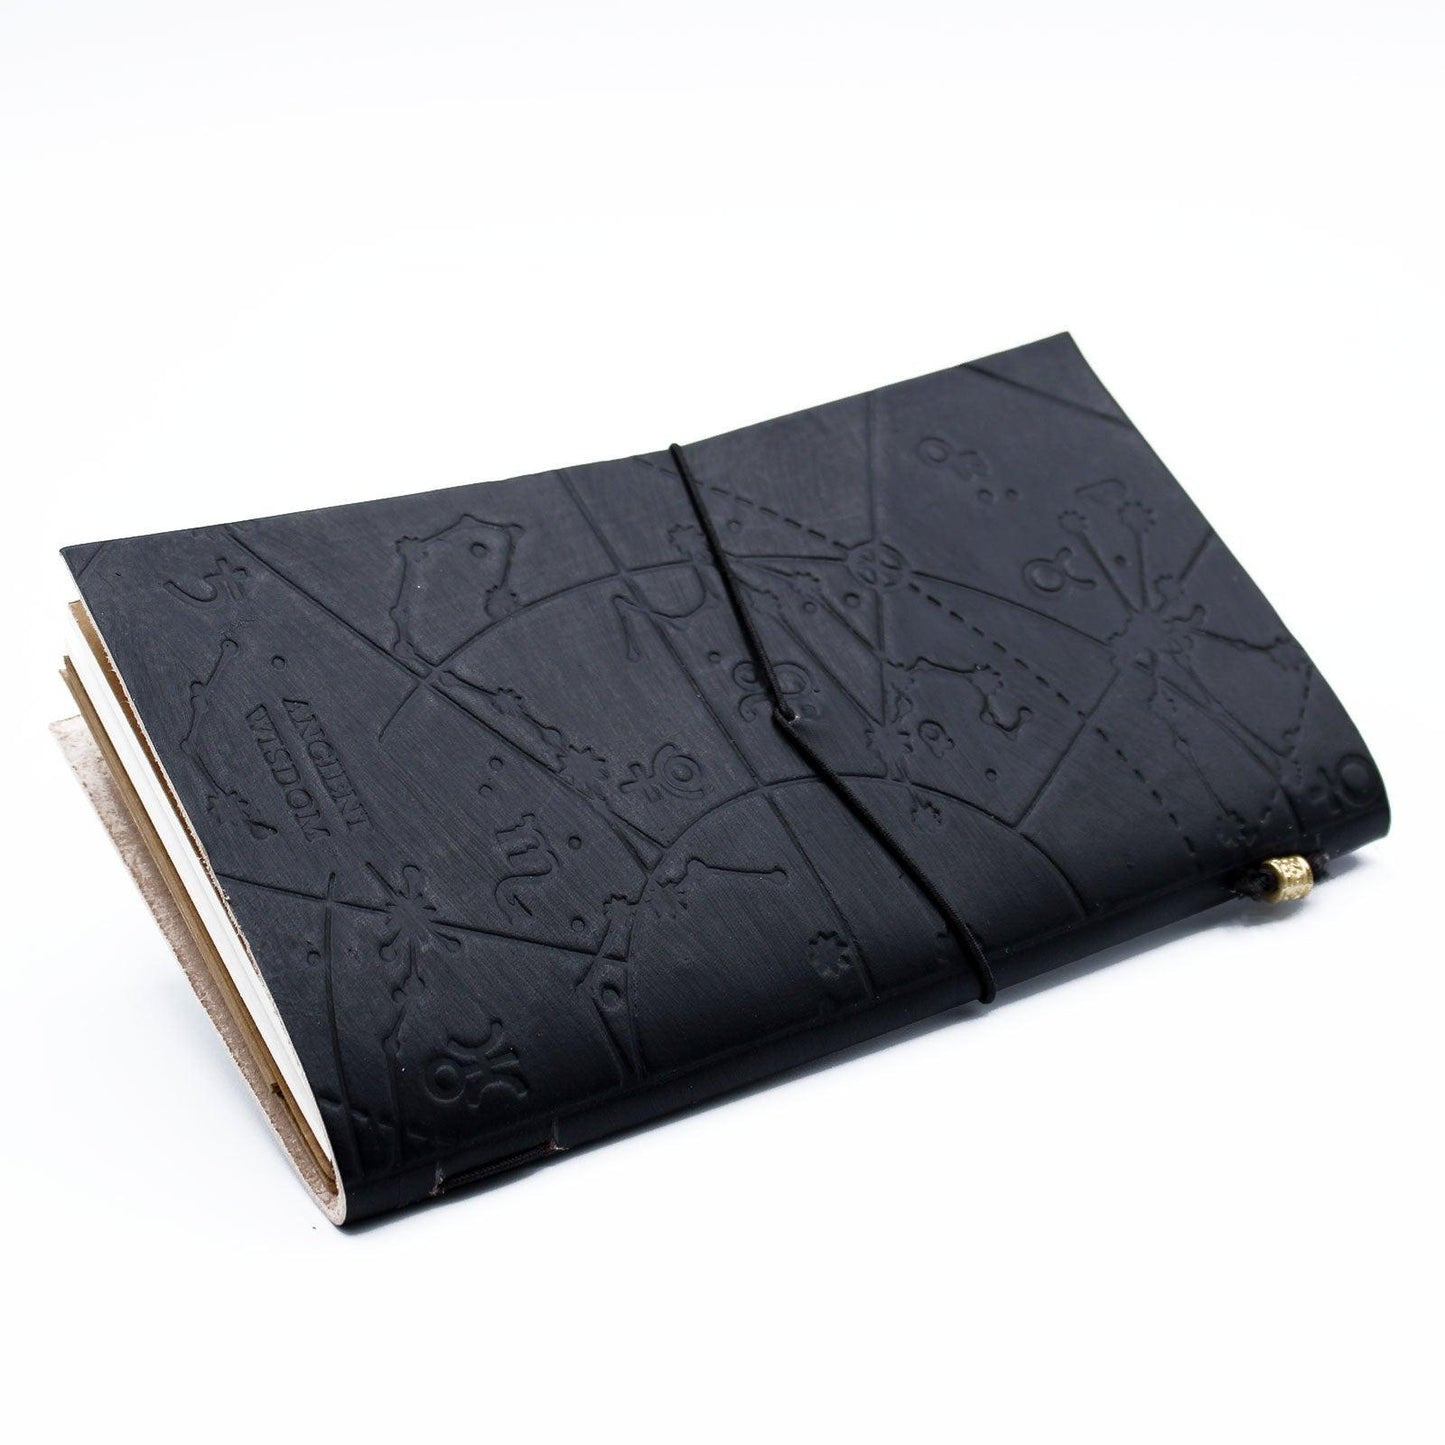 Handmade Leather Journal - My Little Black Book - Black (80 pages) - DuvetDay.co.uk